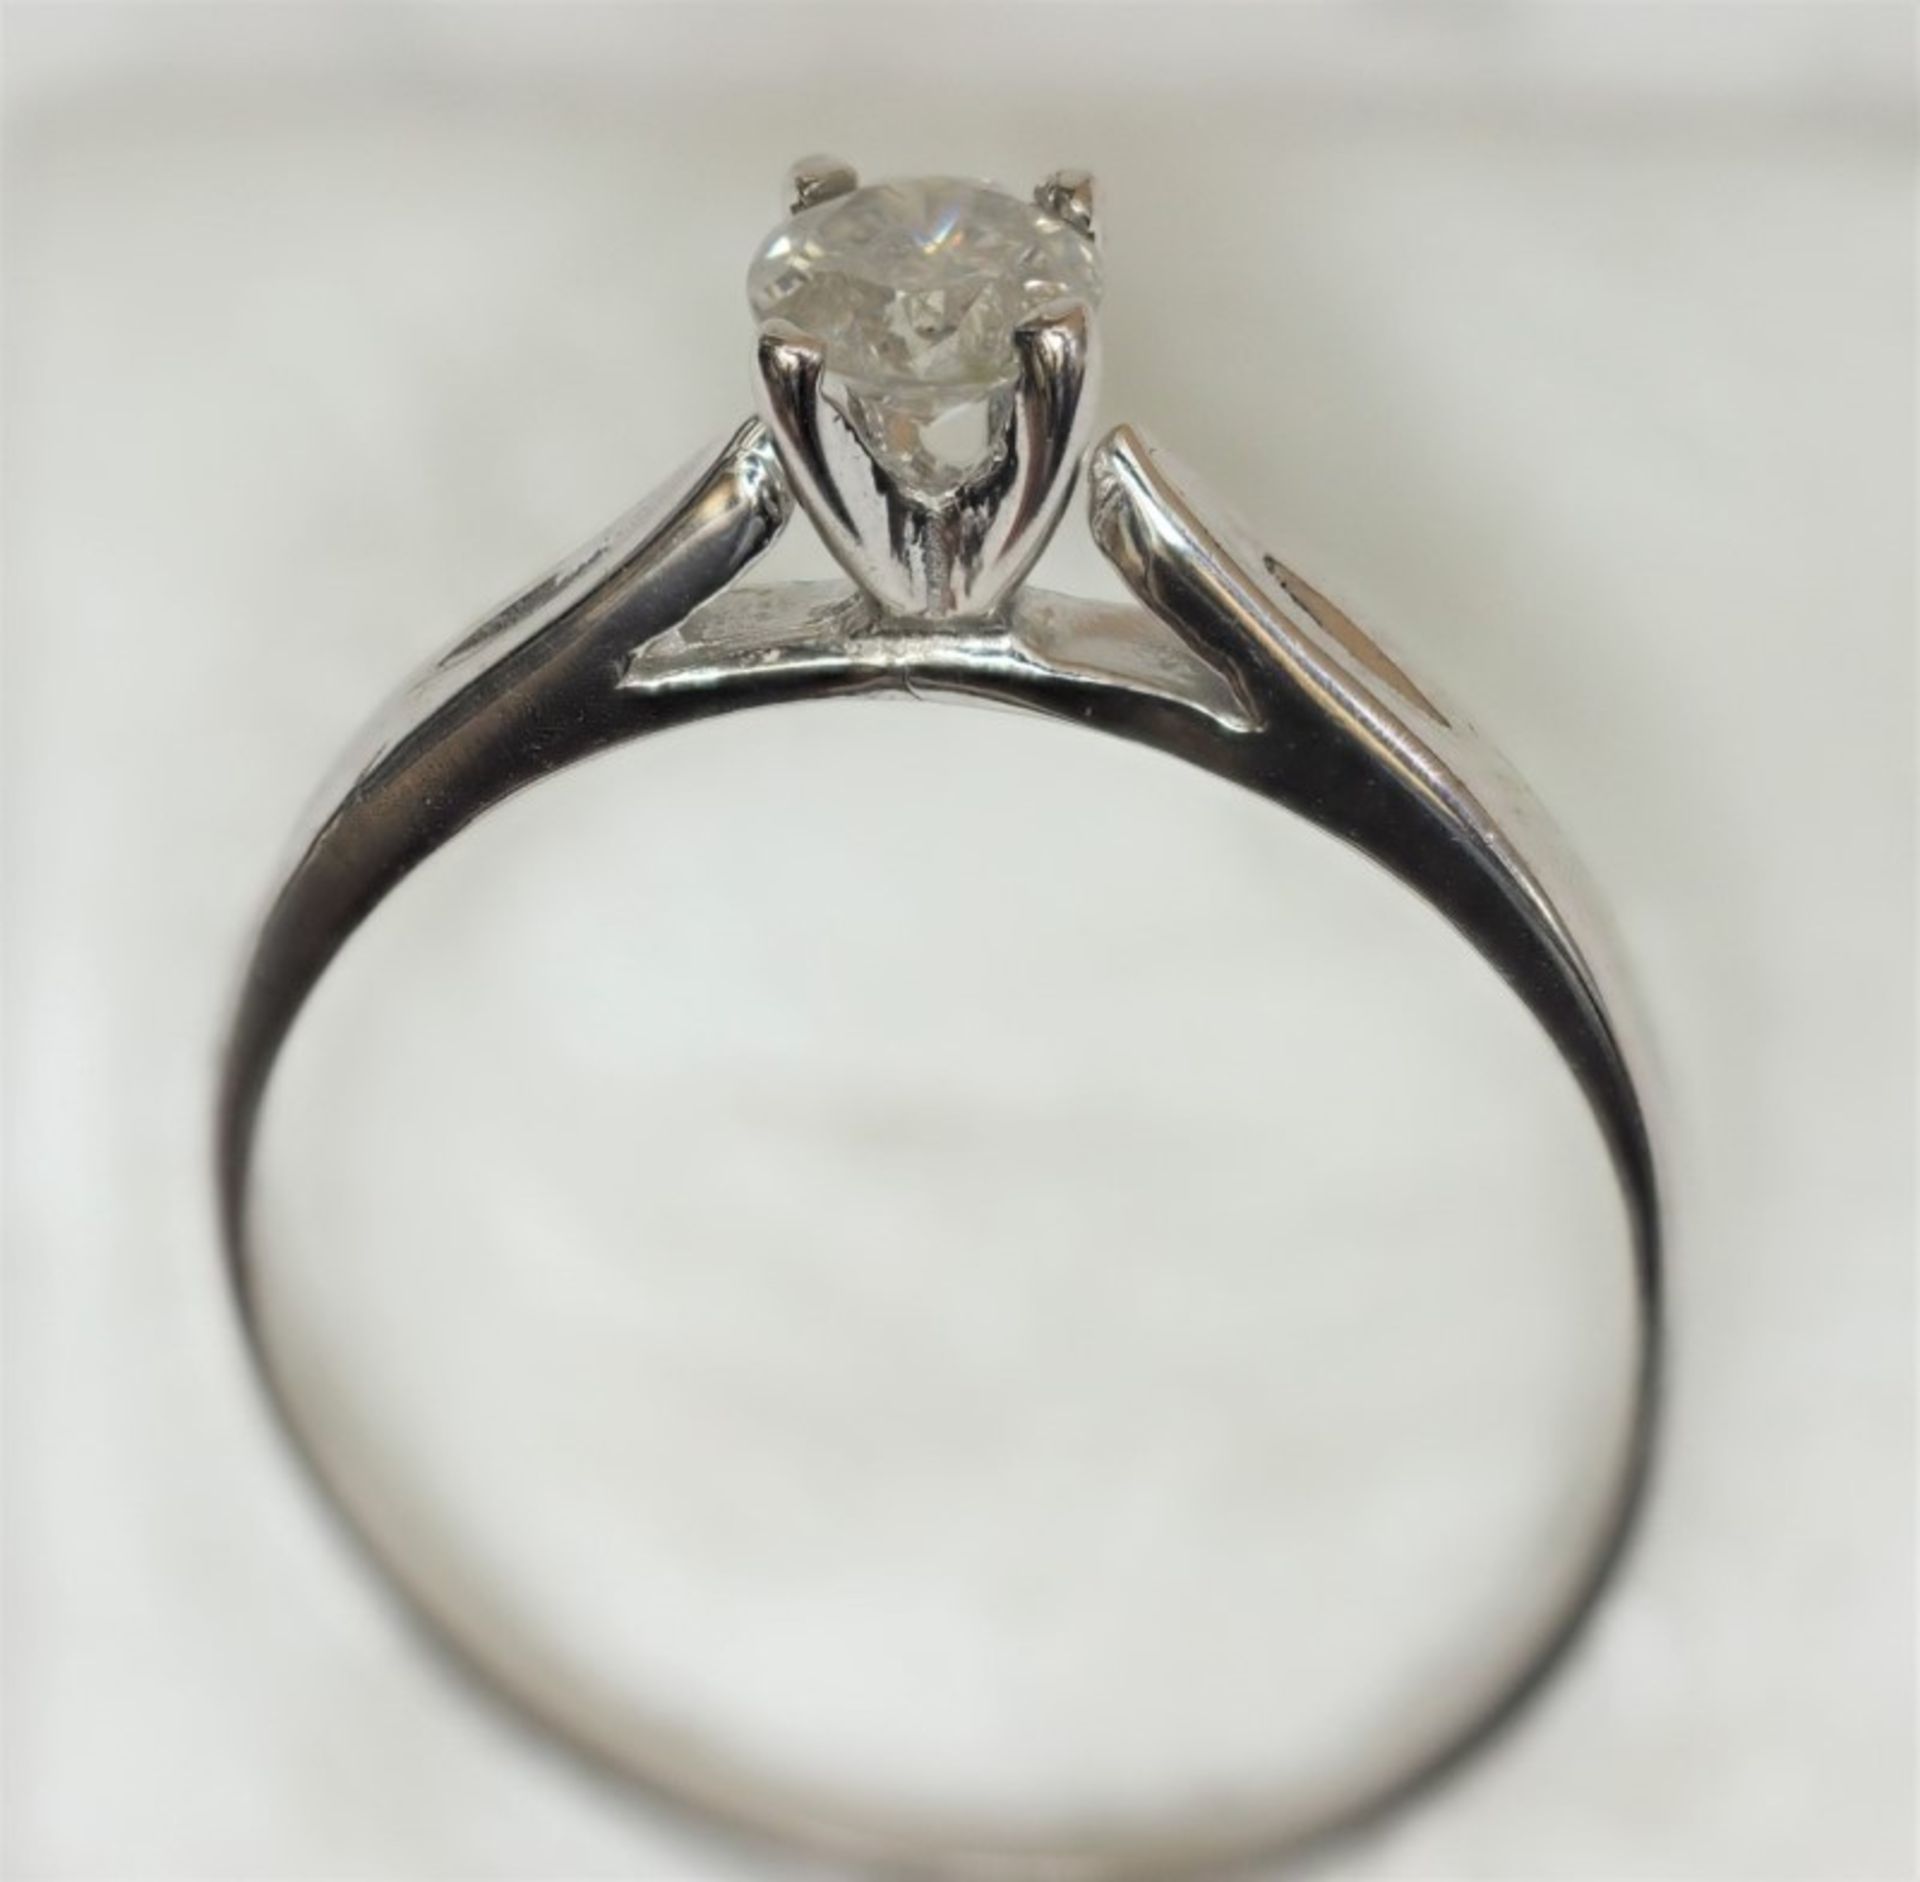 10kt White Gold Solitaire Diamond (0.20ct) Ring Insuranc Value $1500 - Image 3 of 4